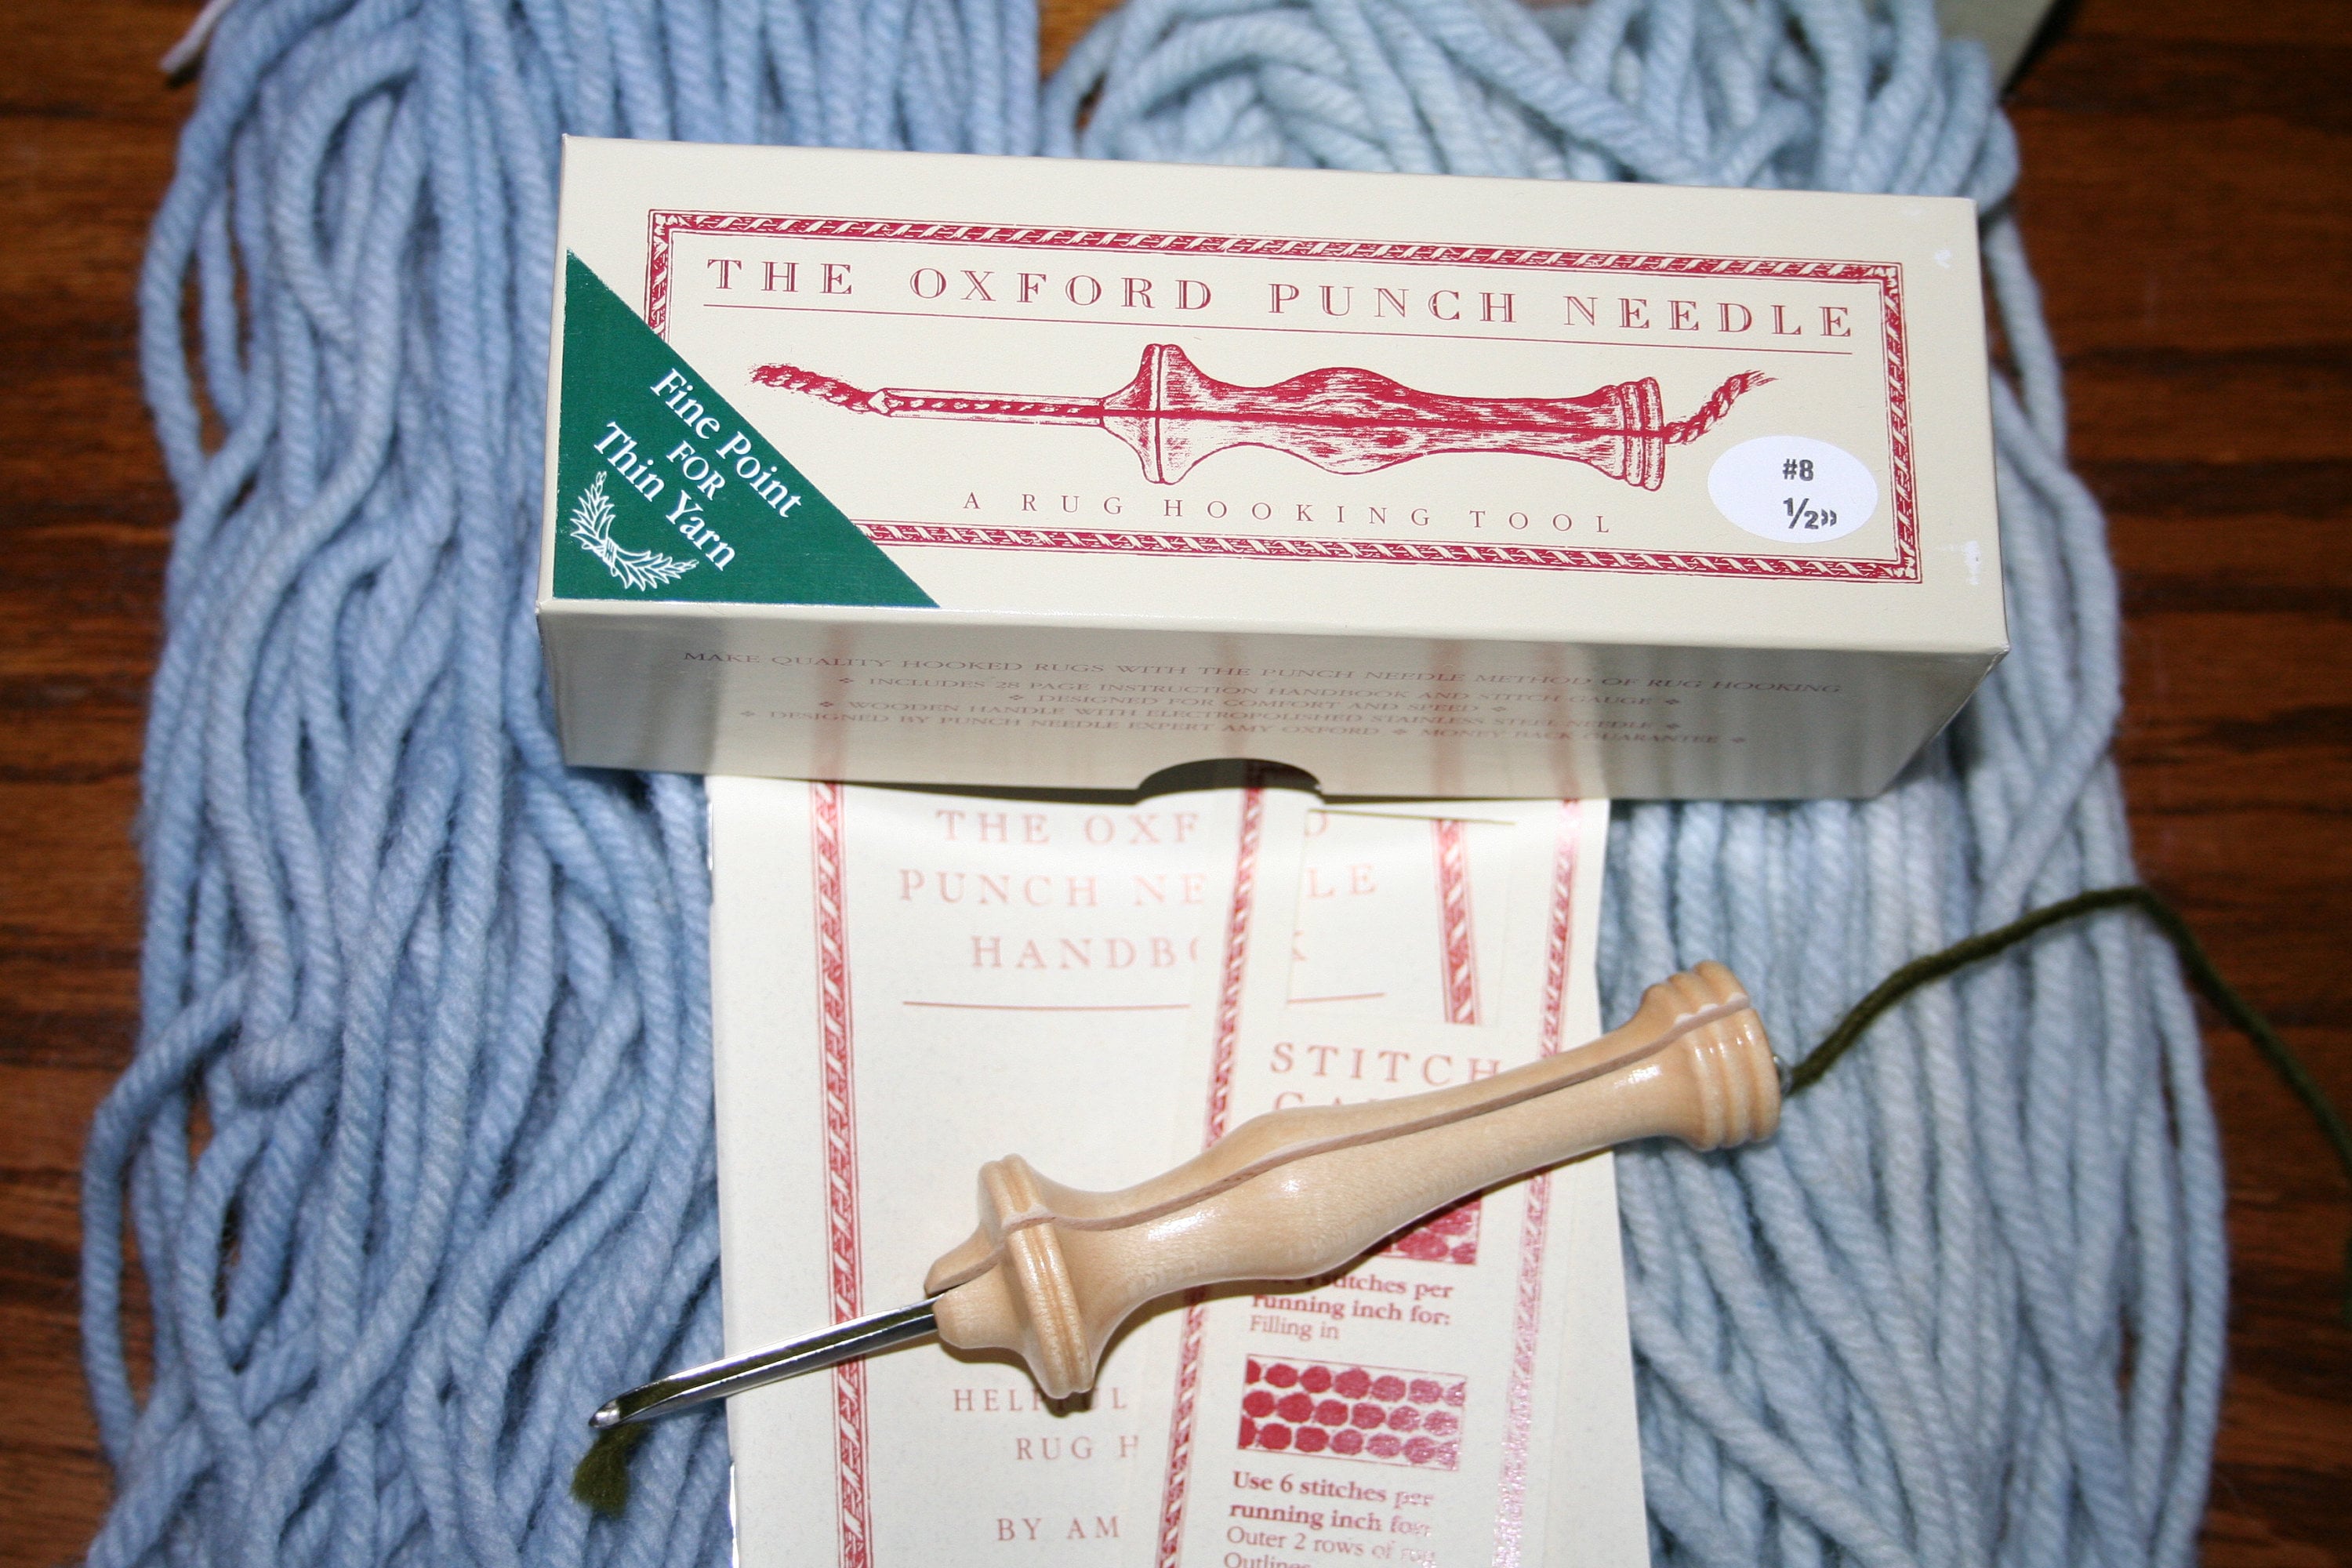 Oxford Punch Needle 14 Fine / Boxed or Unboxed / Punch Needle Tool / Rug  Hooking Tool / Amy Oxford / Needle Punch Tool 